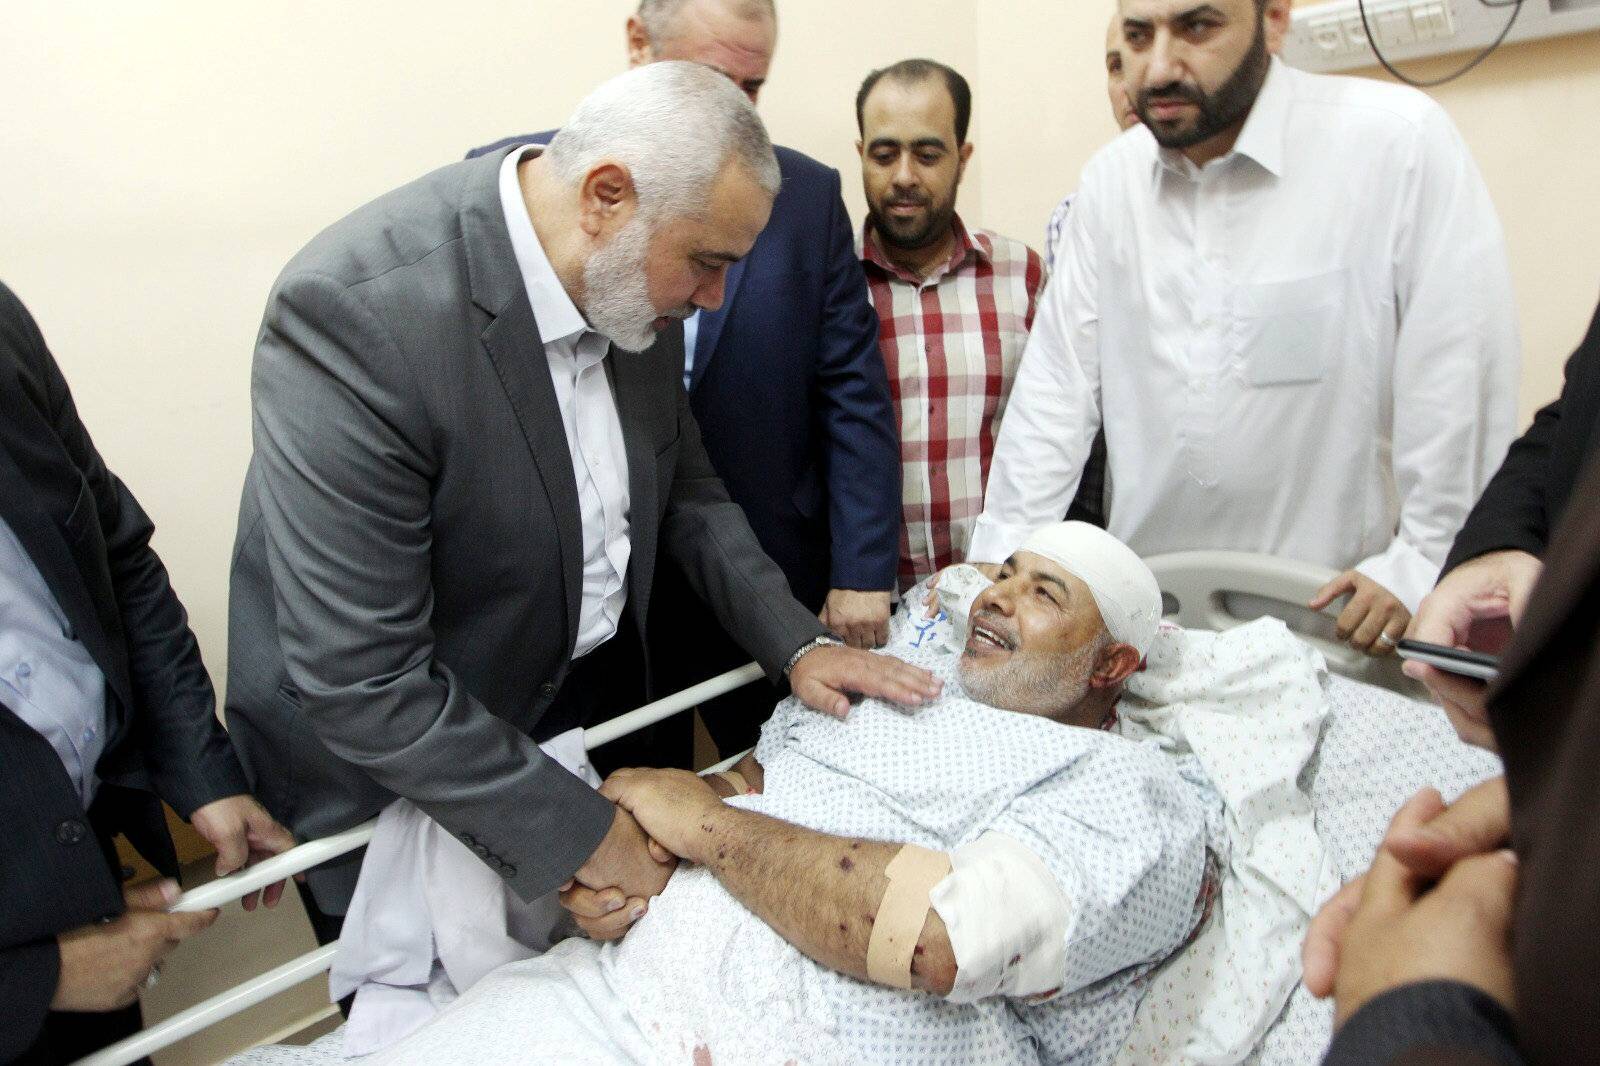 Hamas Chief Ismail Haniyeh visits Hamas' security chief in the Gaza Strip Tawfeeq Abu Naeem as he lies on a bed at a hospital in Gaza City